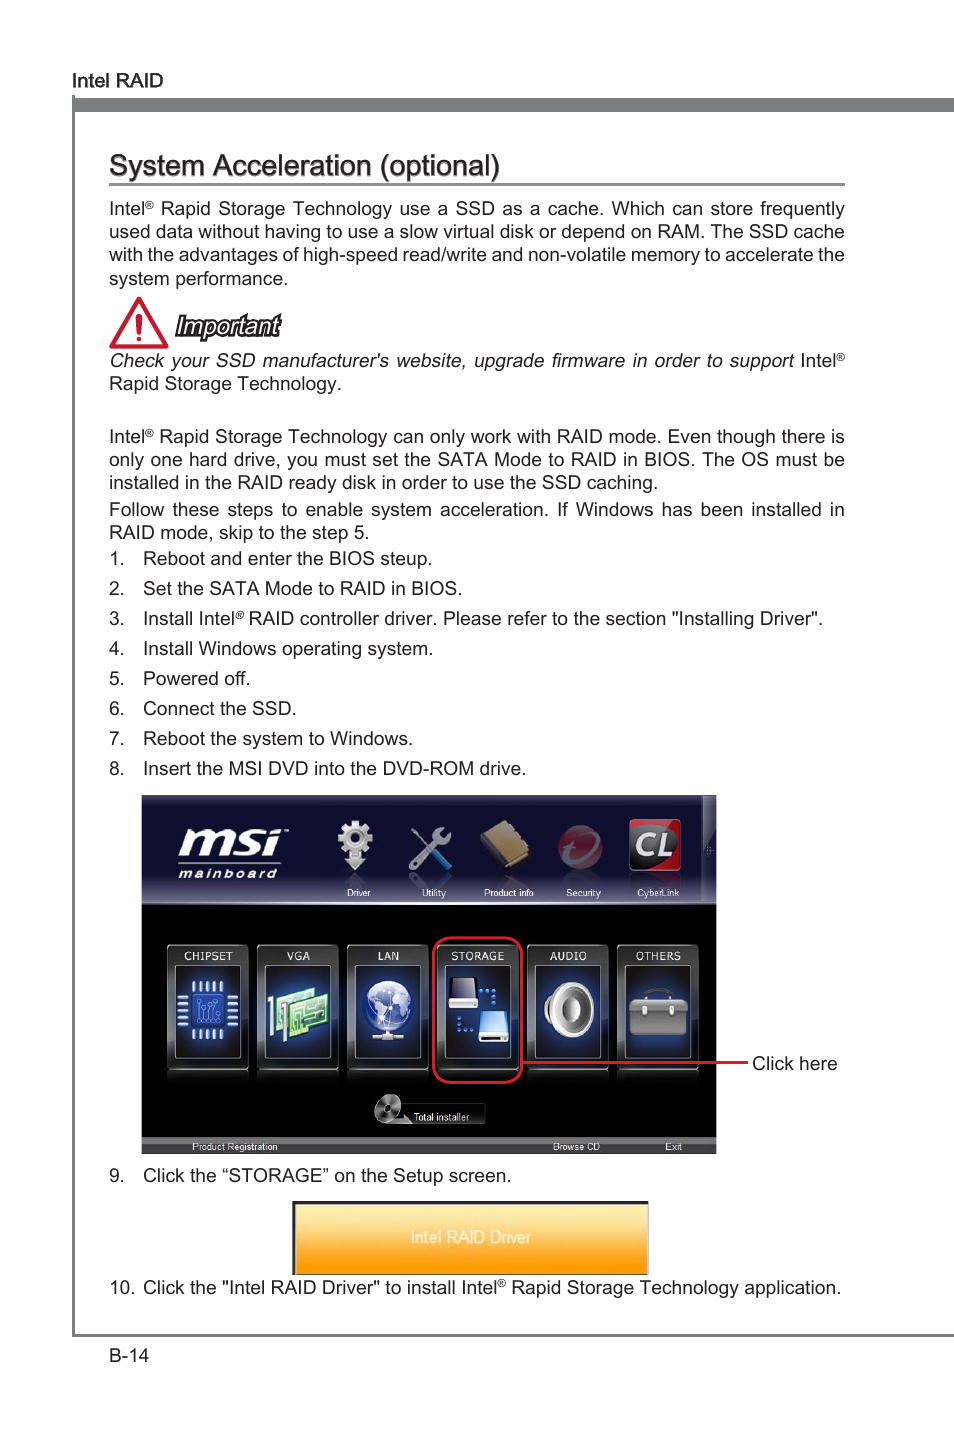 System accelerat on (opt onal), Important | MSI Z77 MPOWER User Manual |  Page 94 / 100 | Original mode